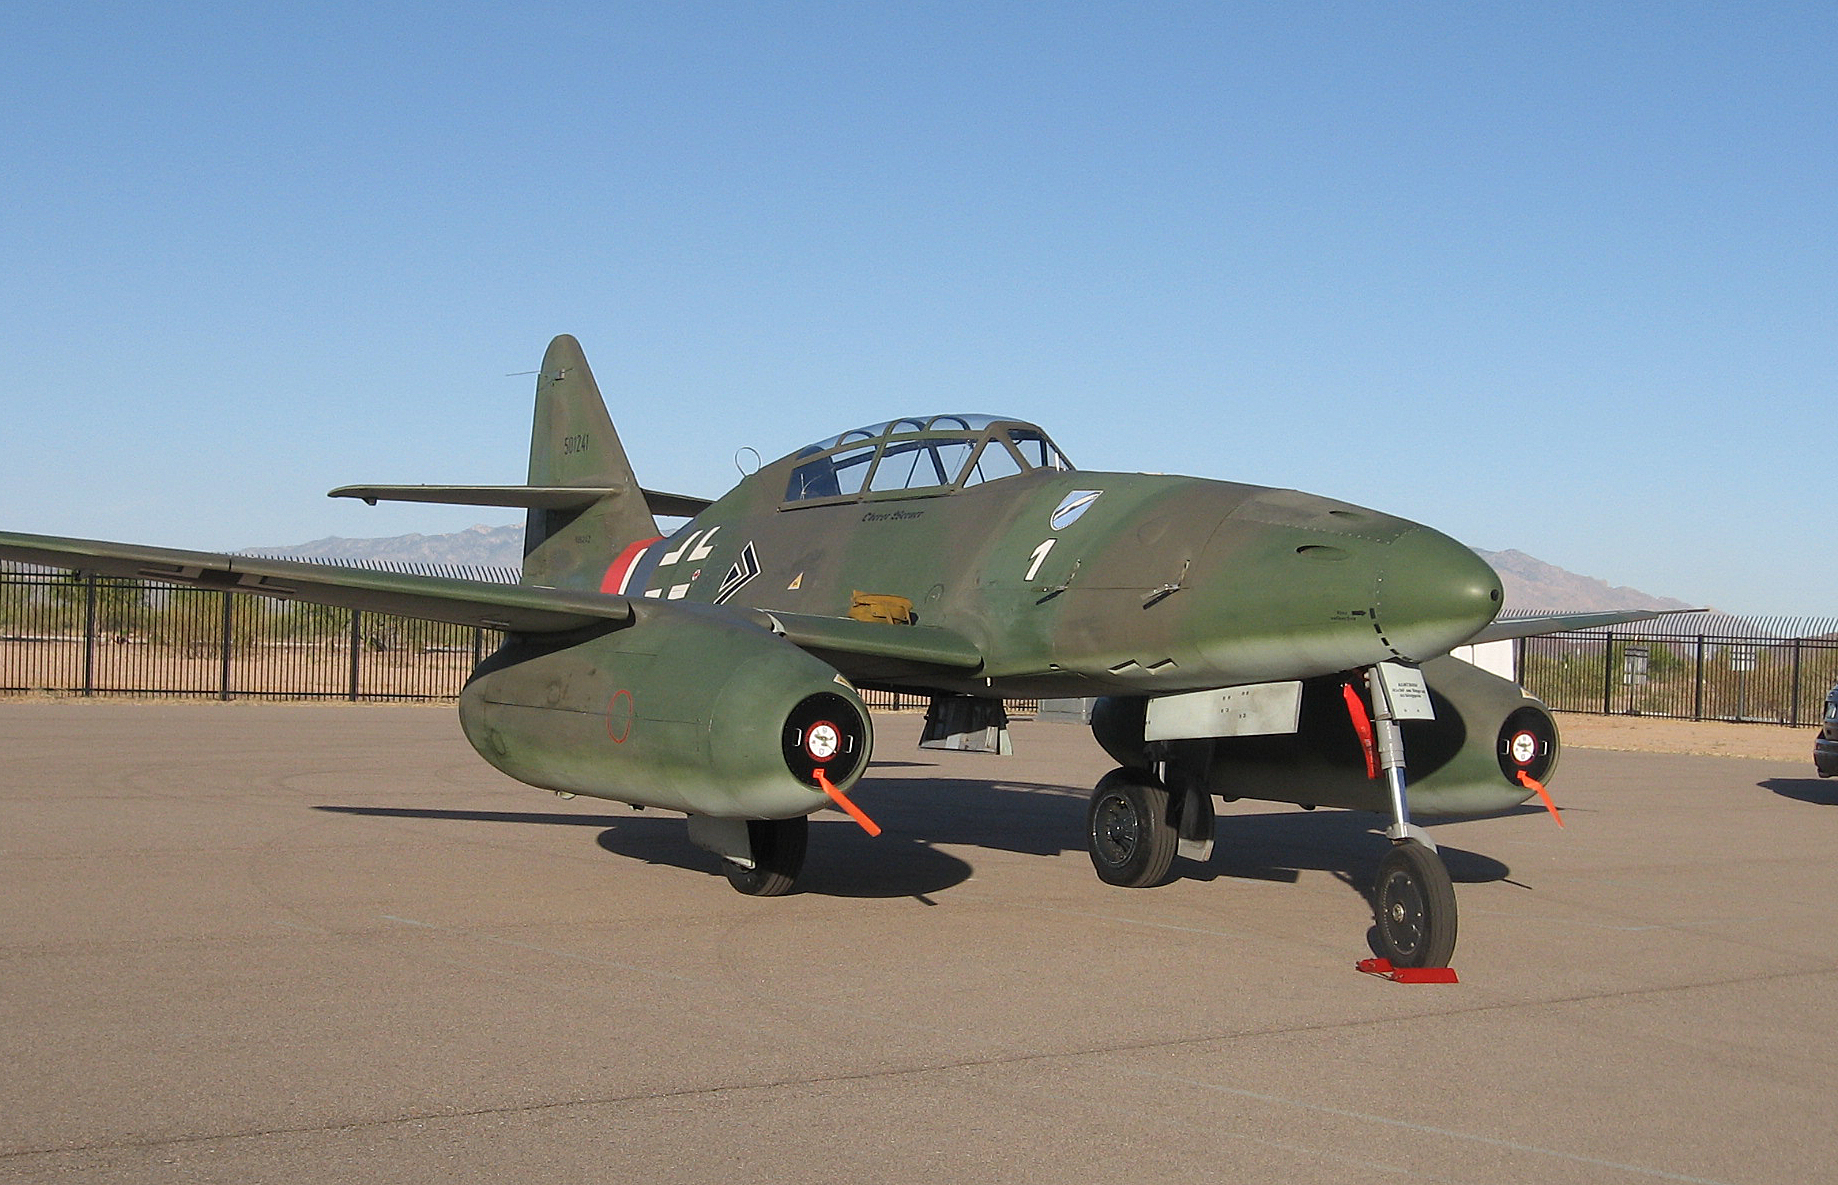 There are very few suriving examples of Me 262s left. However there are flying replicas.